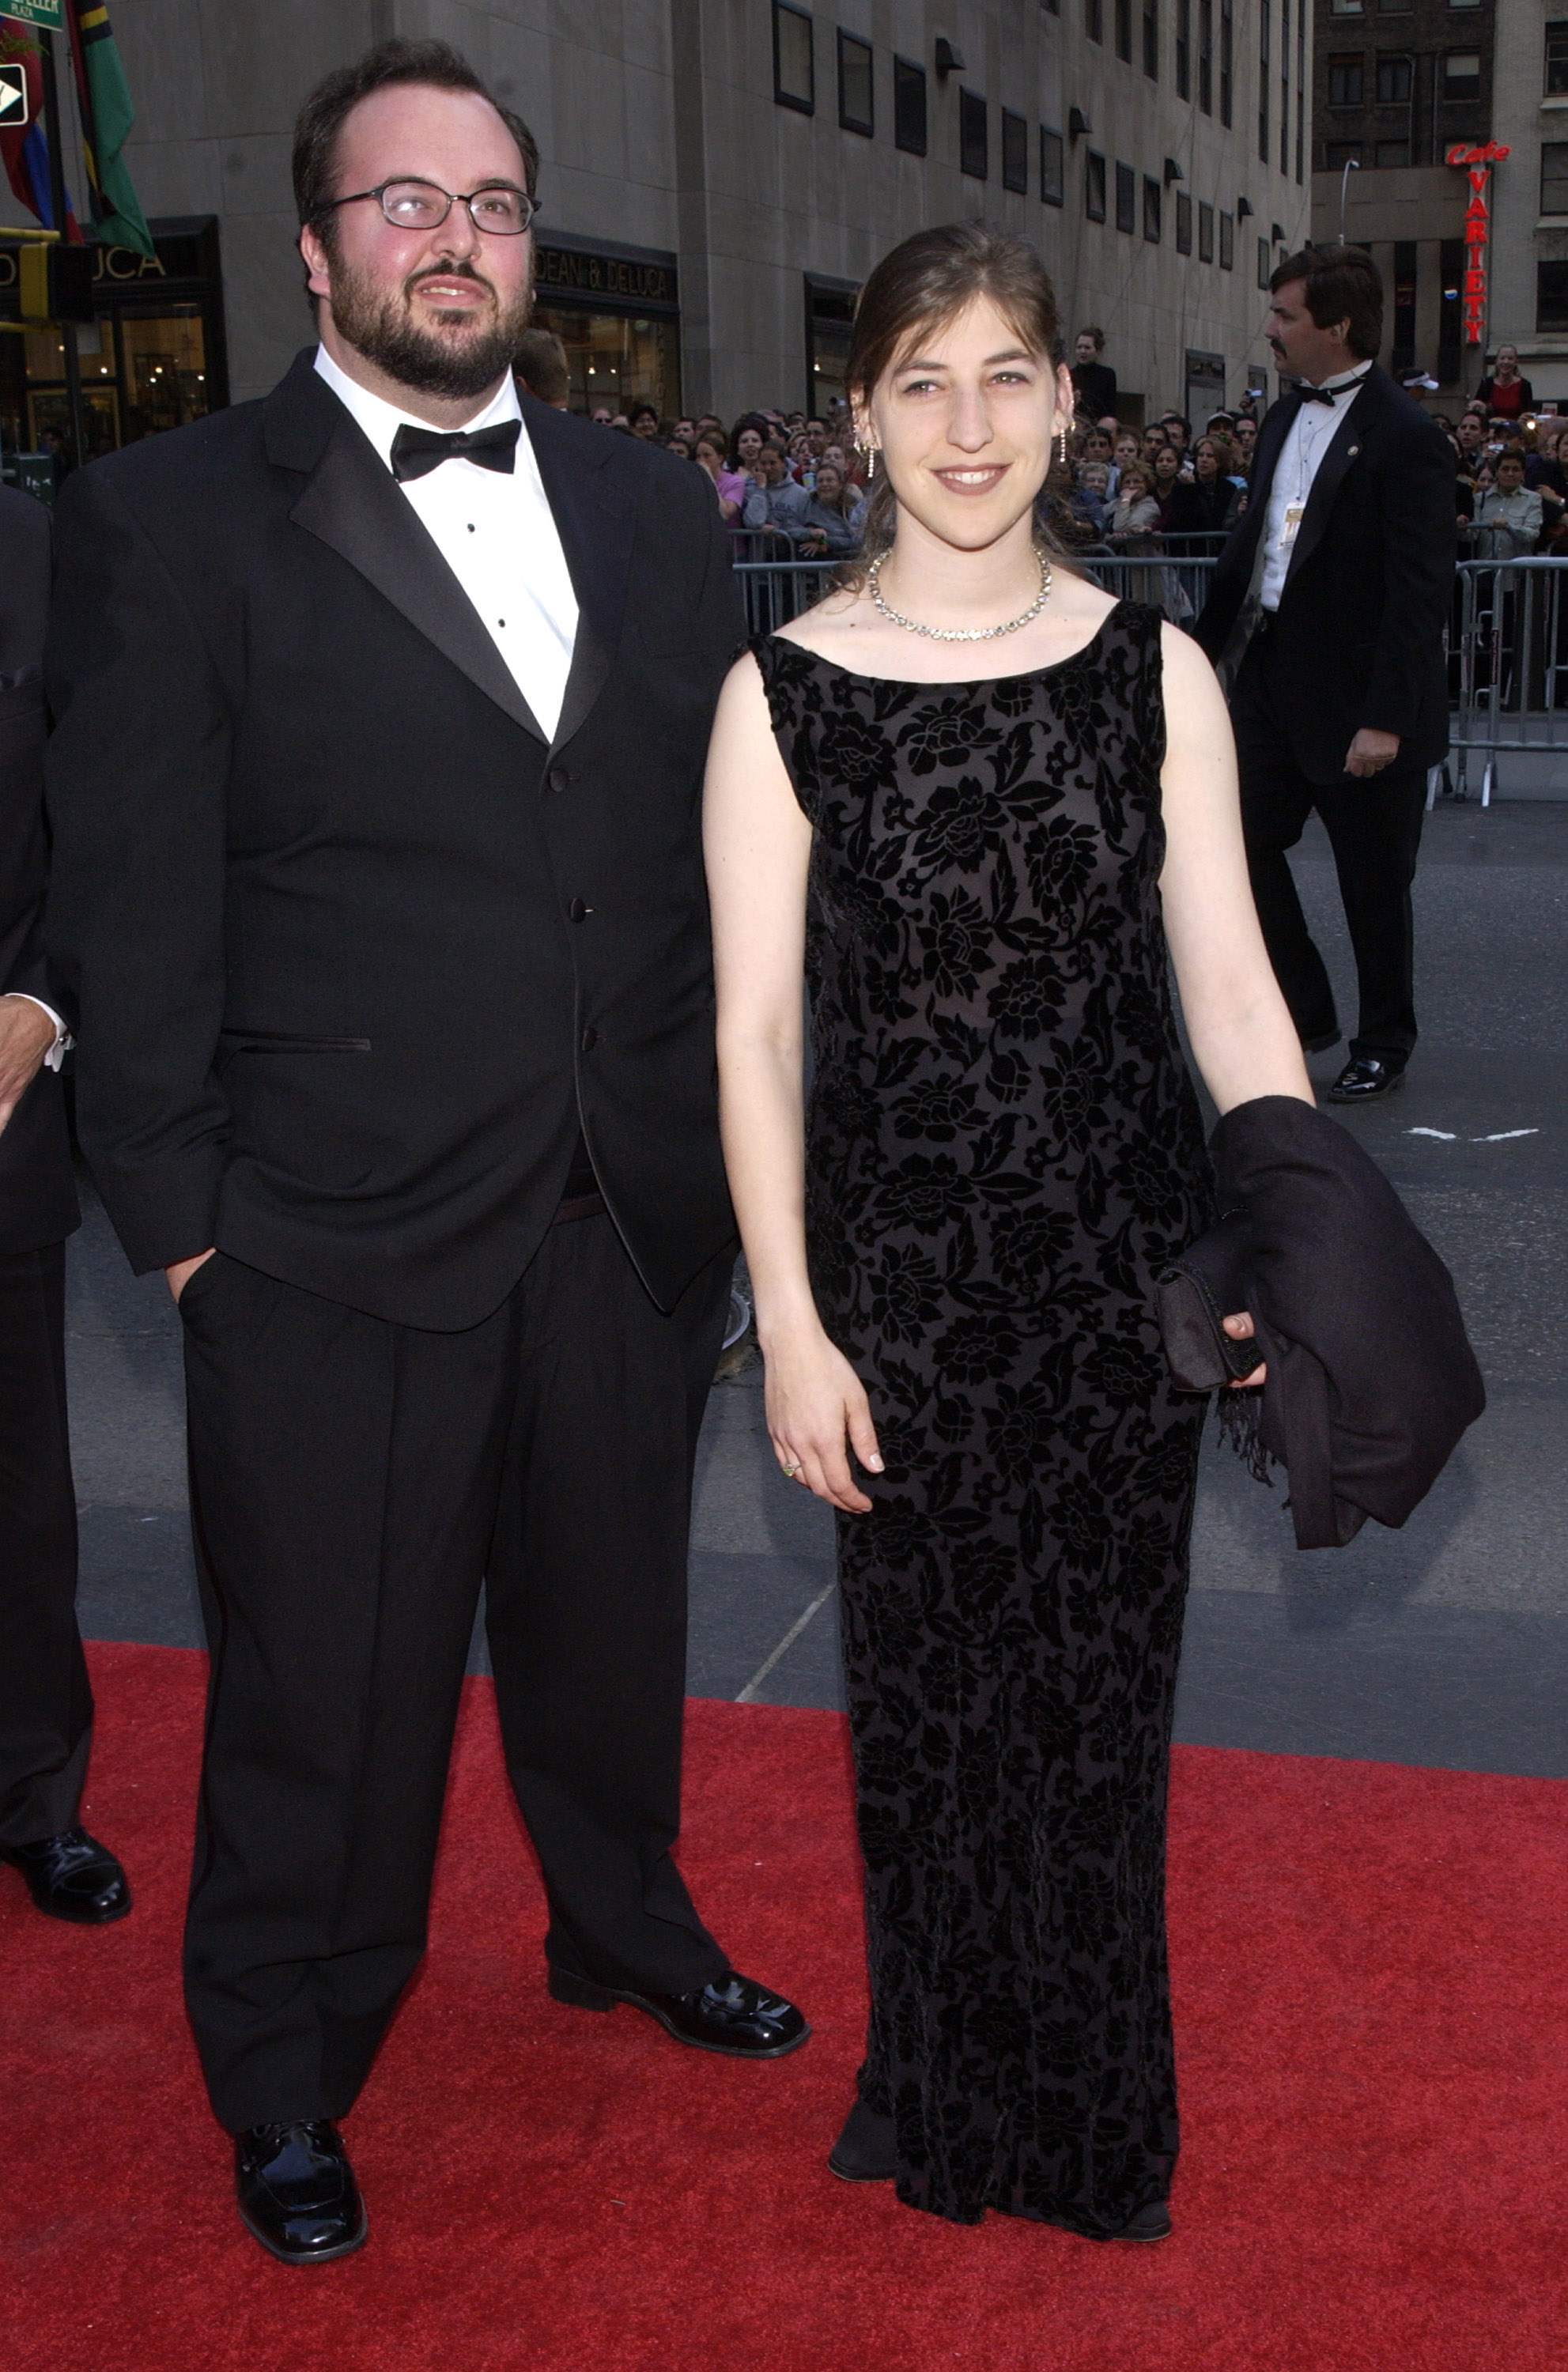 Michael Stone and Mayim Bialik attend NBC's 75th Anniversary in New York City | Source: Getty Images